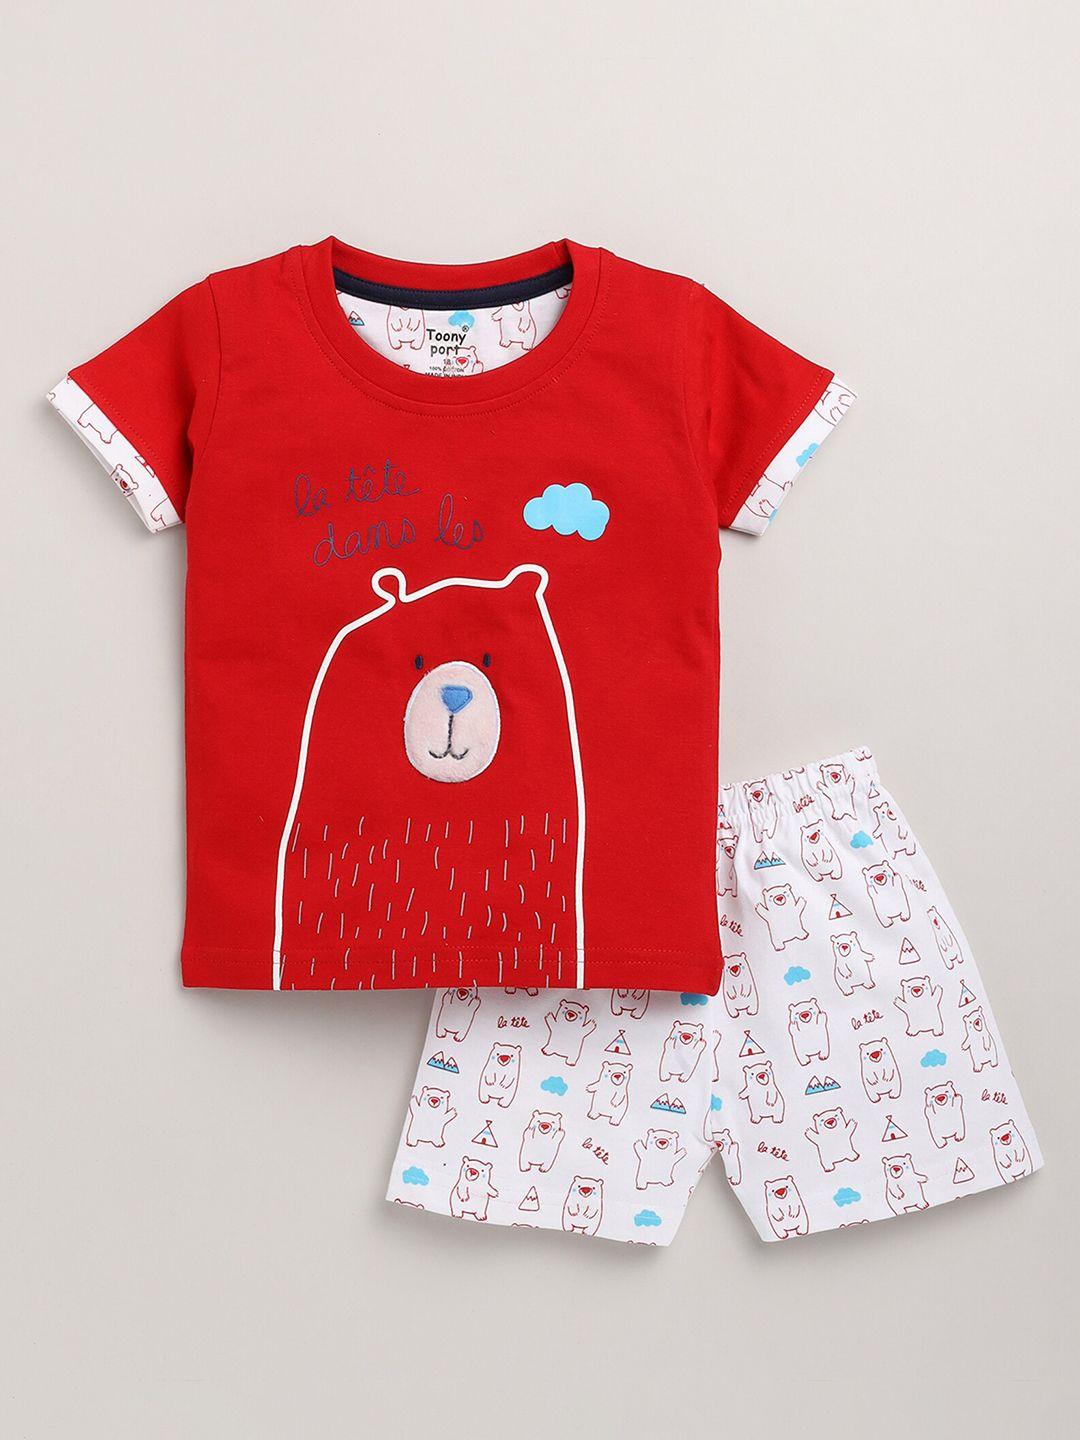 toonyport-unisex-kids-red-&-white-printed-t-shirt-with-shorts